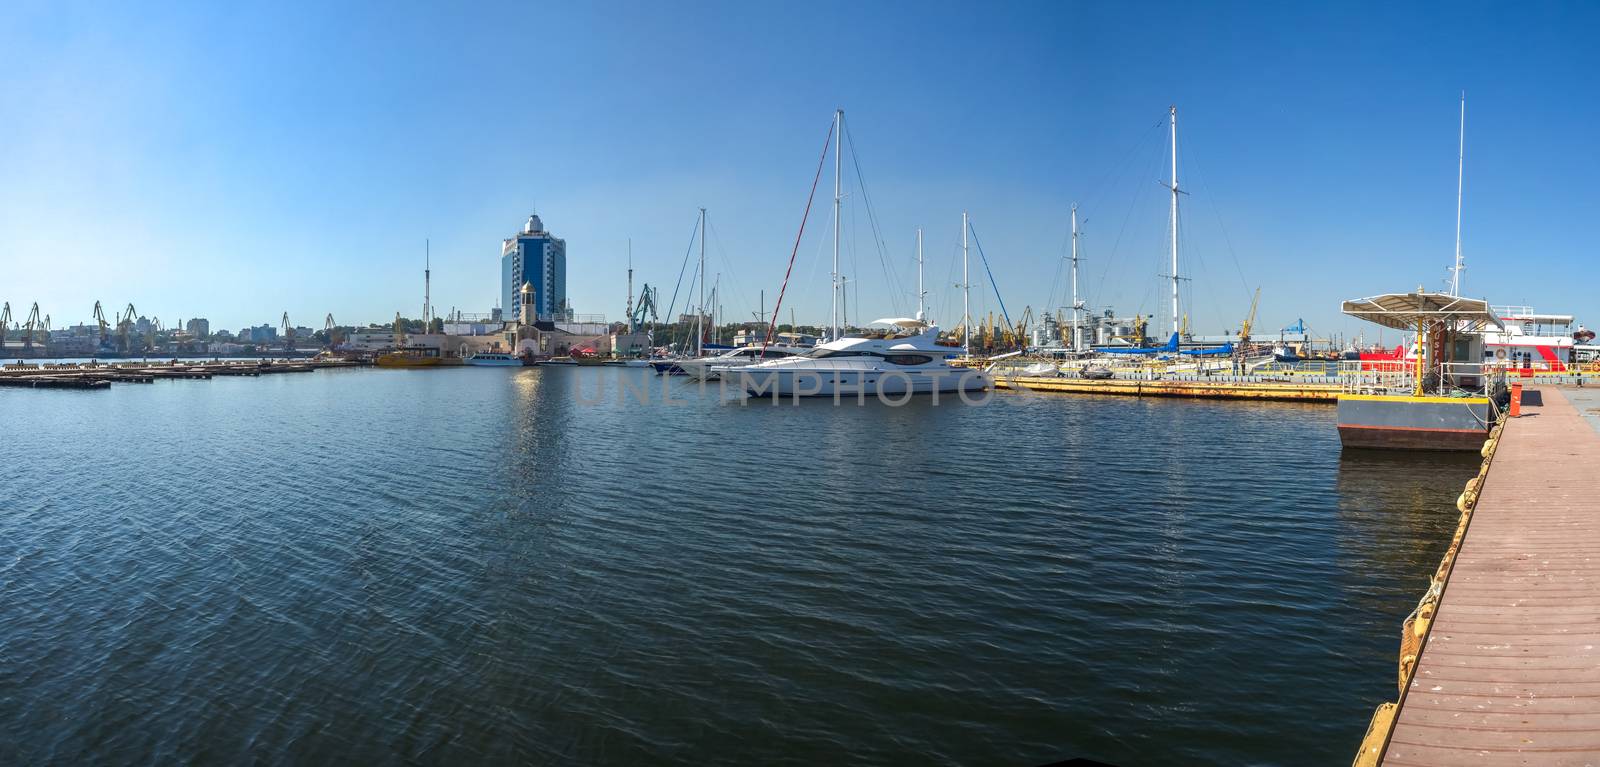 Yacht parking in the seaport of Odessa, Ukraine by Multipedia